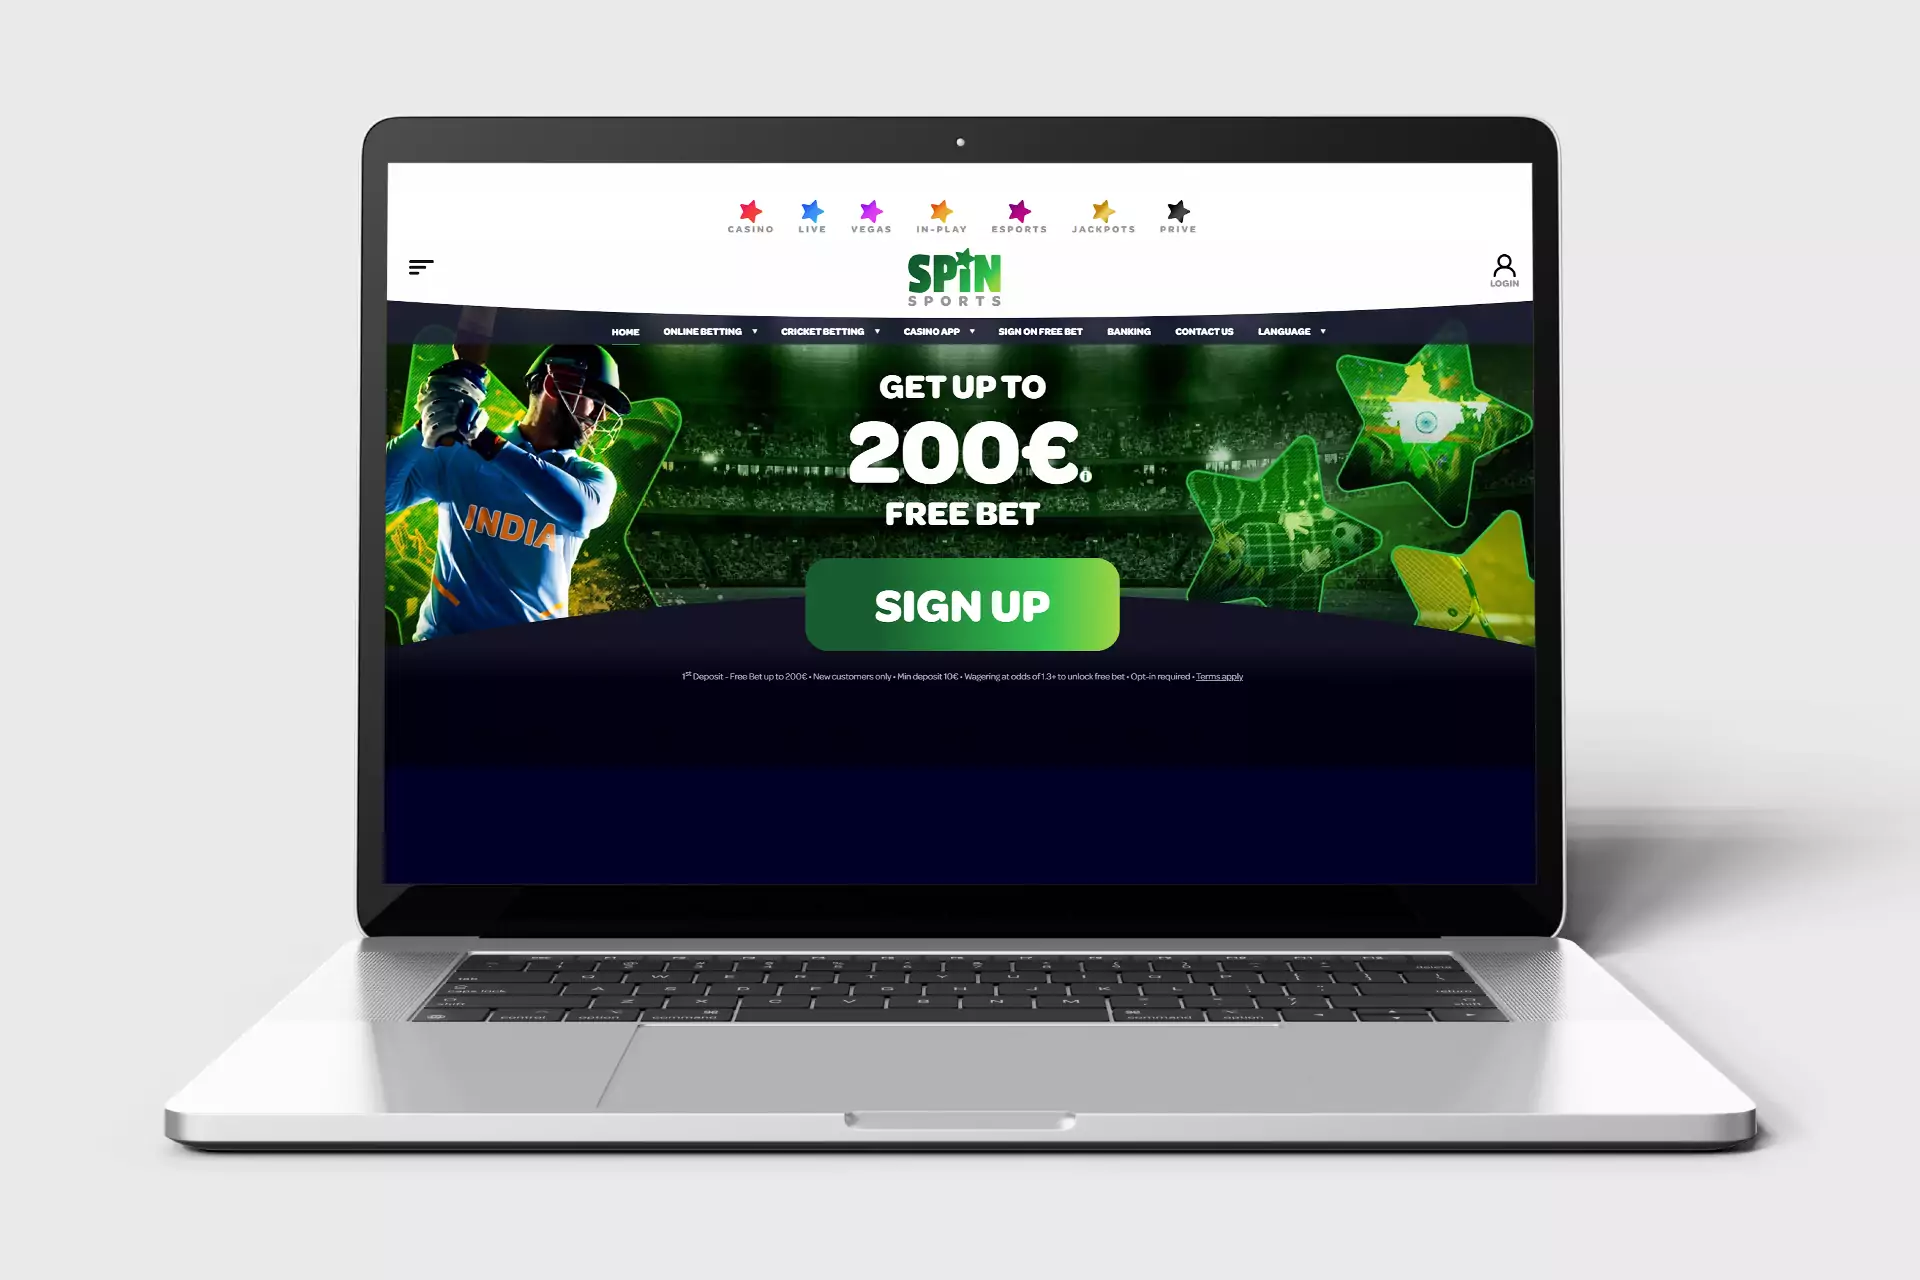 Visit the official site of Spin Sports.